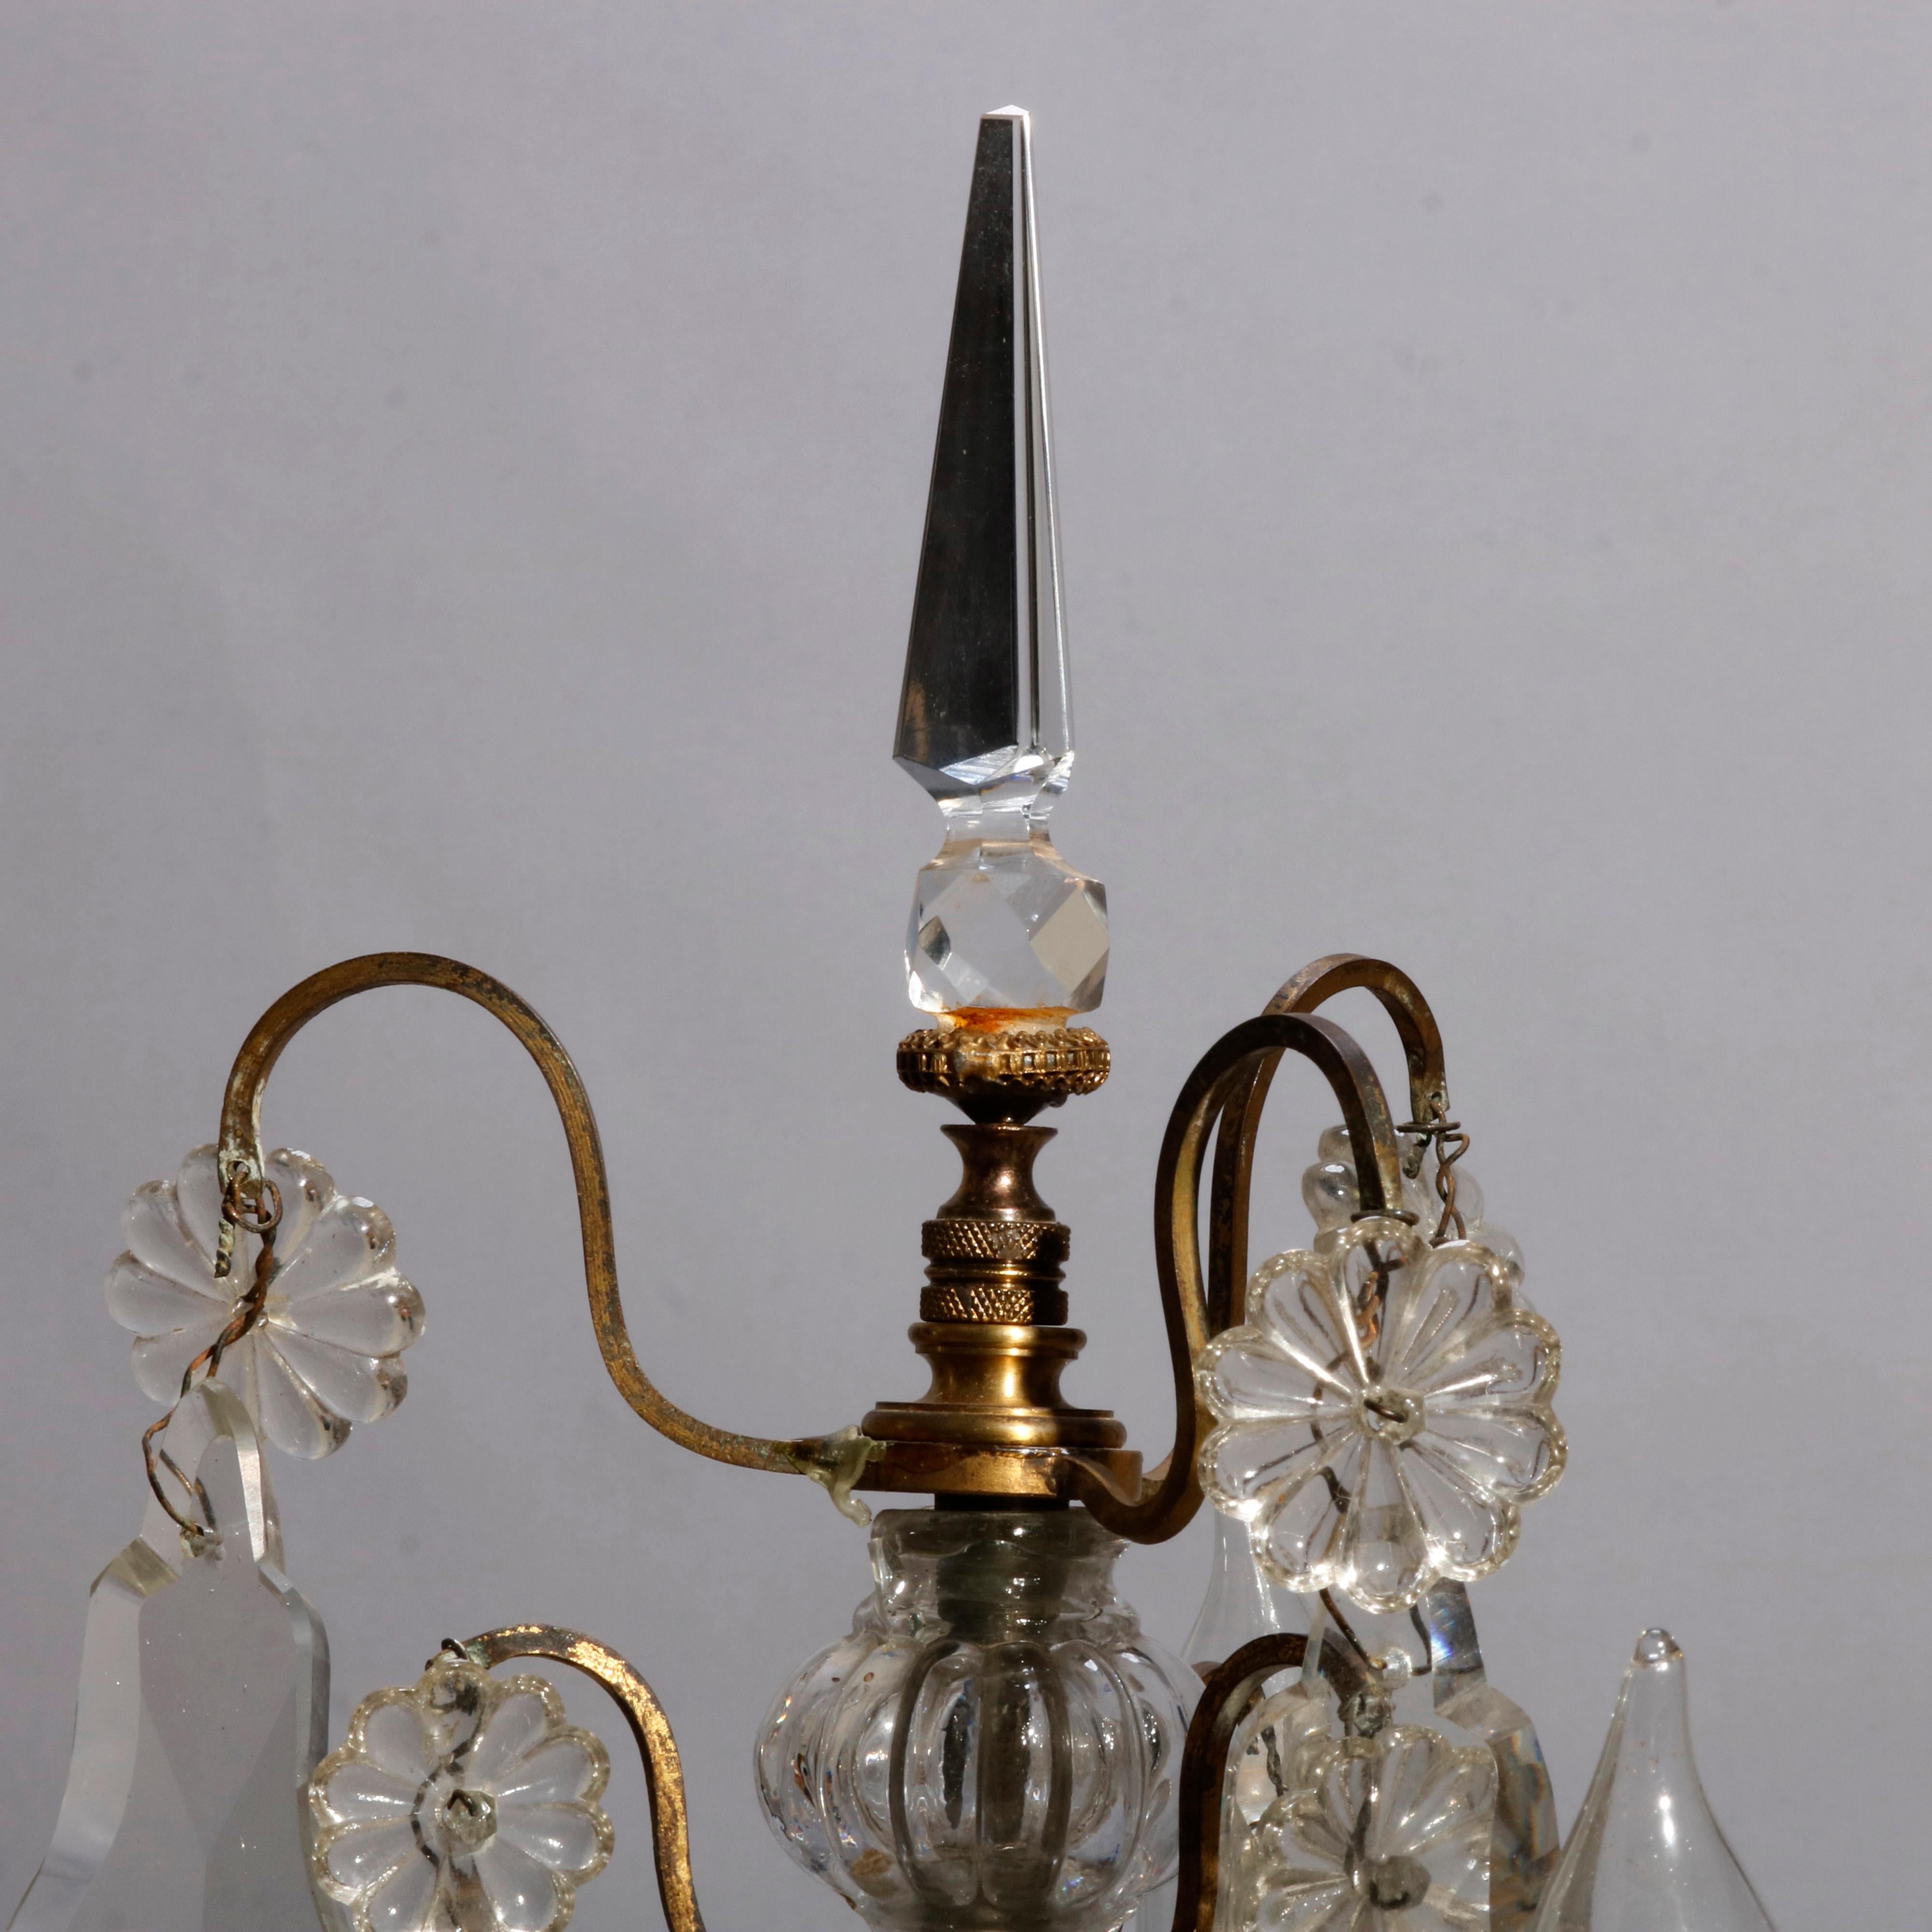 An antique pair of French candelabras table lamps offer bronzed frame with scroll form arms terminating in candle lights and raised on flared foot, cut crystals throughout, circa 1910

Measures: 21.5